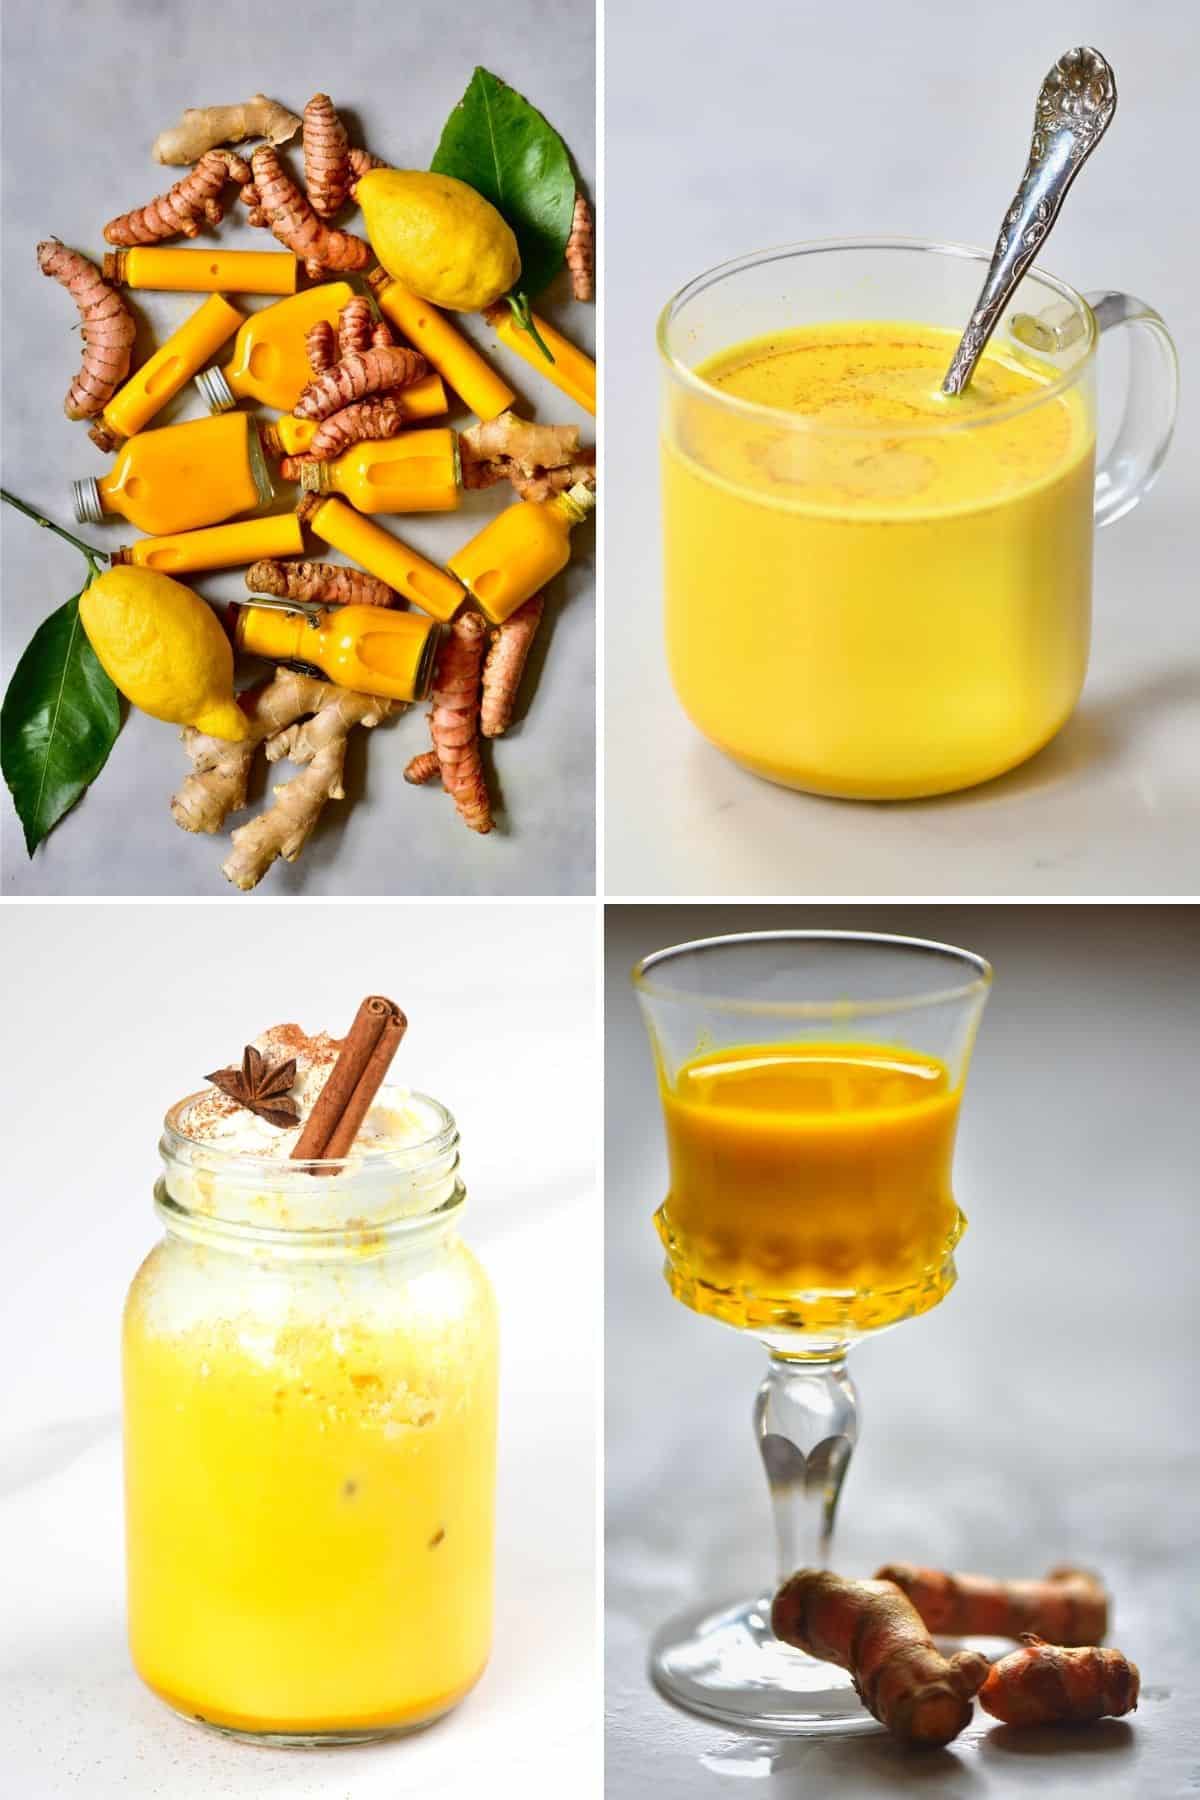 Drink recipes with turmeric